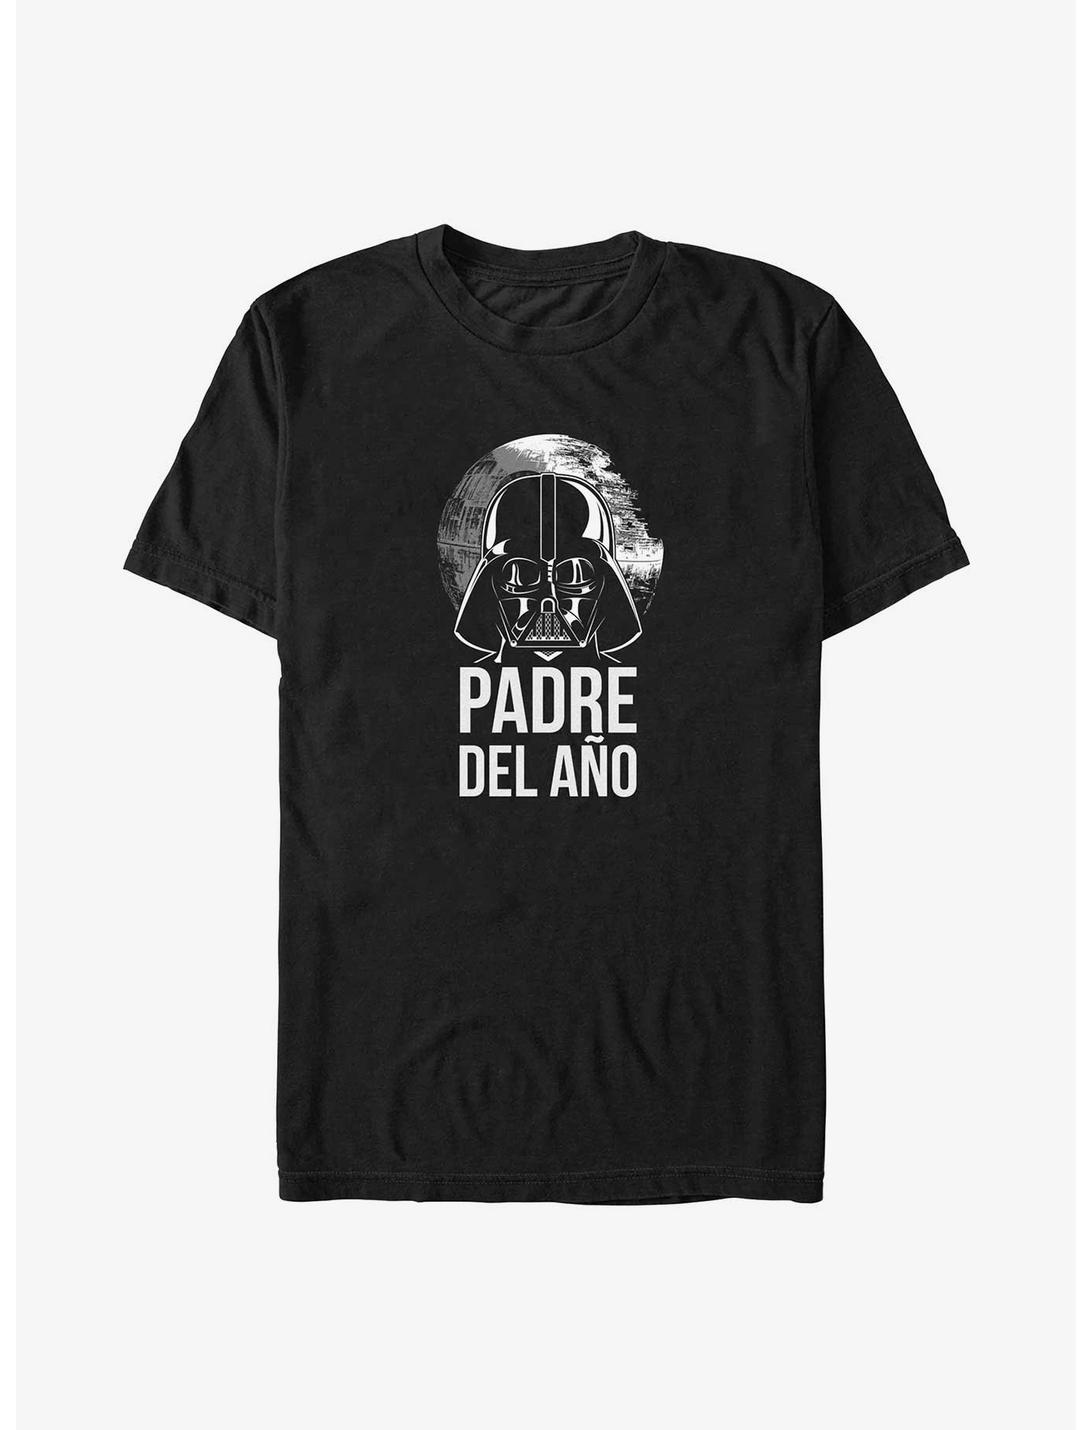 Star Wars Vader Padre Del Ano Father of the Year In Spanish Big & Tall T-Shirt, BLACK, hi-res